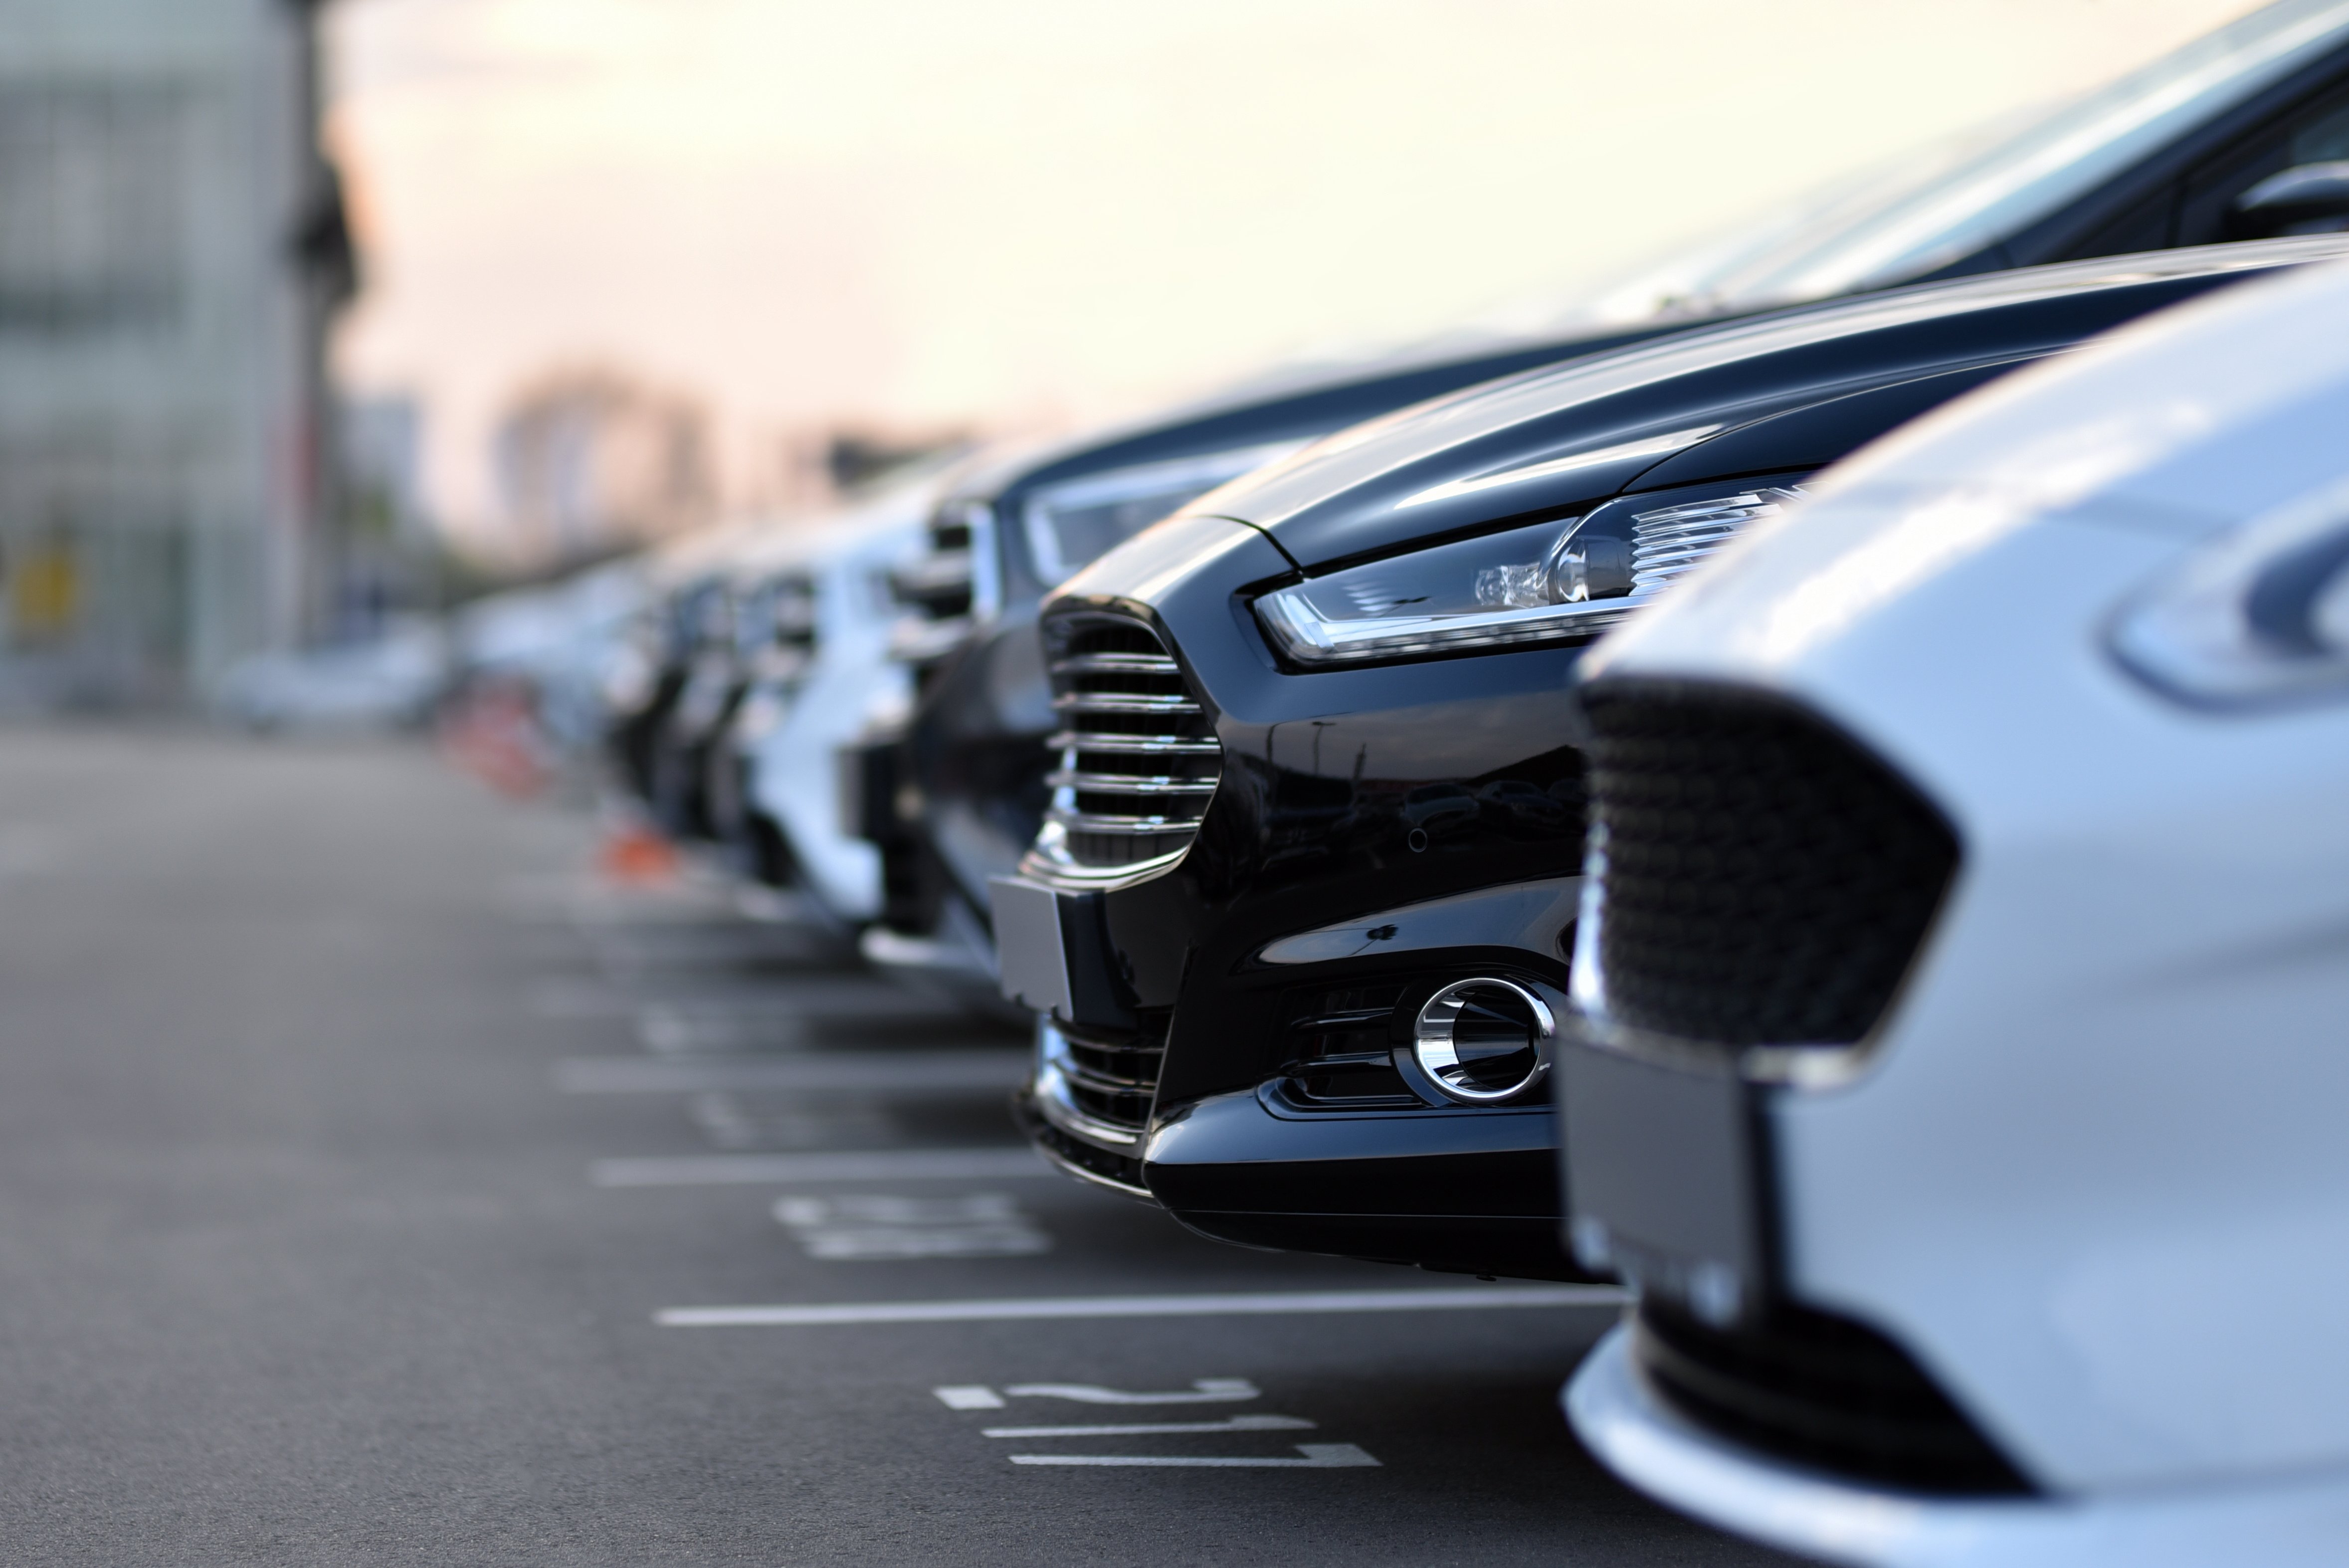 rows of black and white cars on a parking lot waiting to be sold